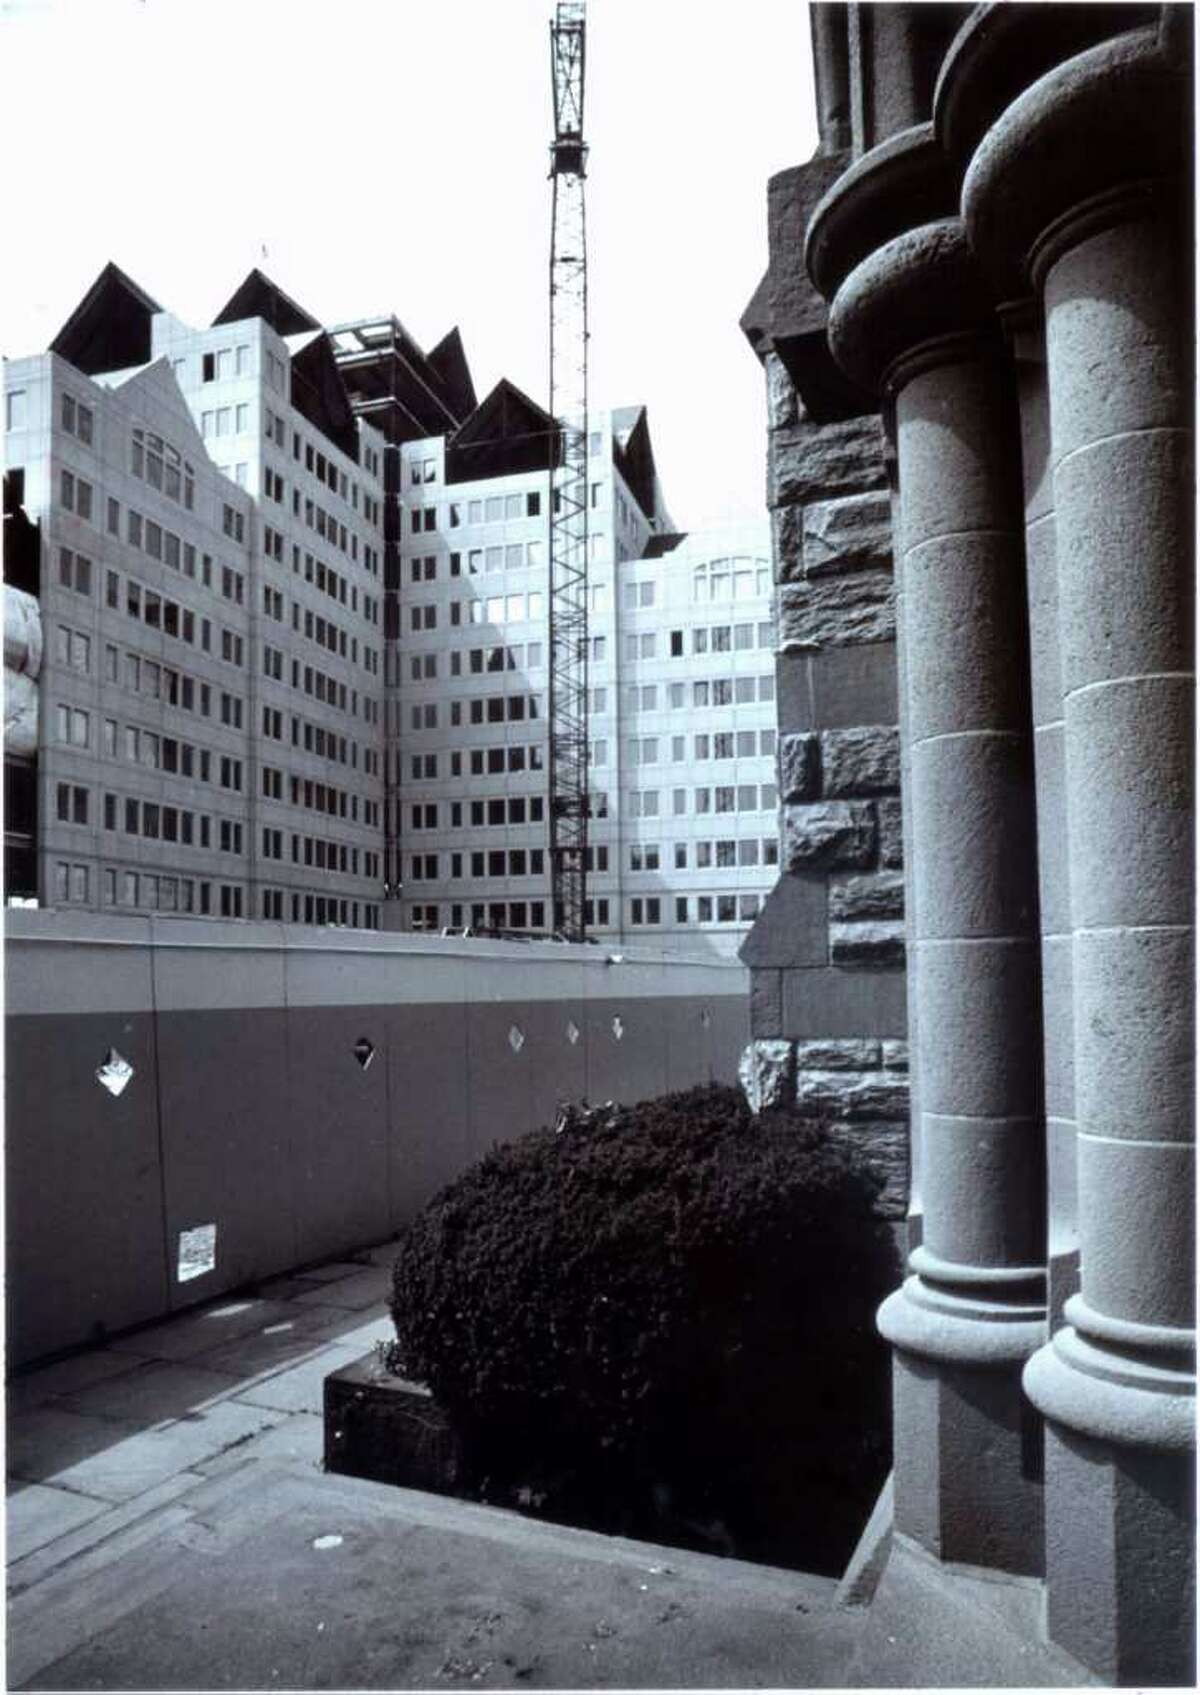 July 11, 1986: The new encirlces the old and both point to the sky outside St. John's Episcopal Church in Stamford. the church, with its columns visible on the right, faces Canterbury Green, an office, retail and residential complex under construction on Broad Street and Suburban Avenue.